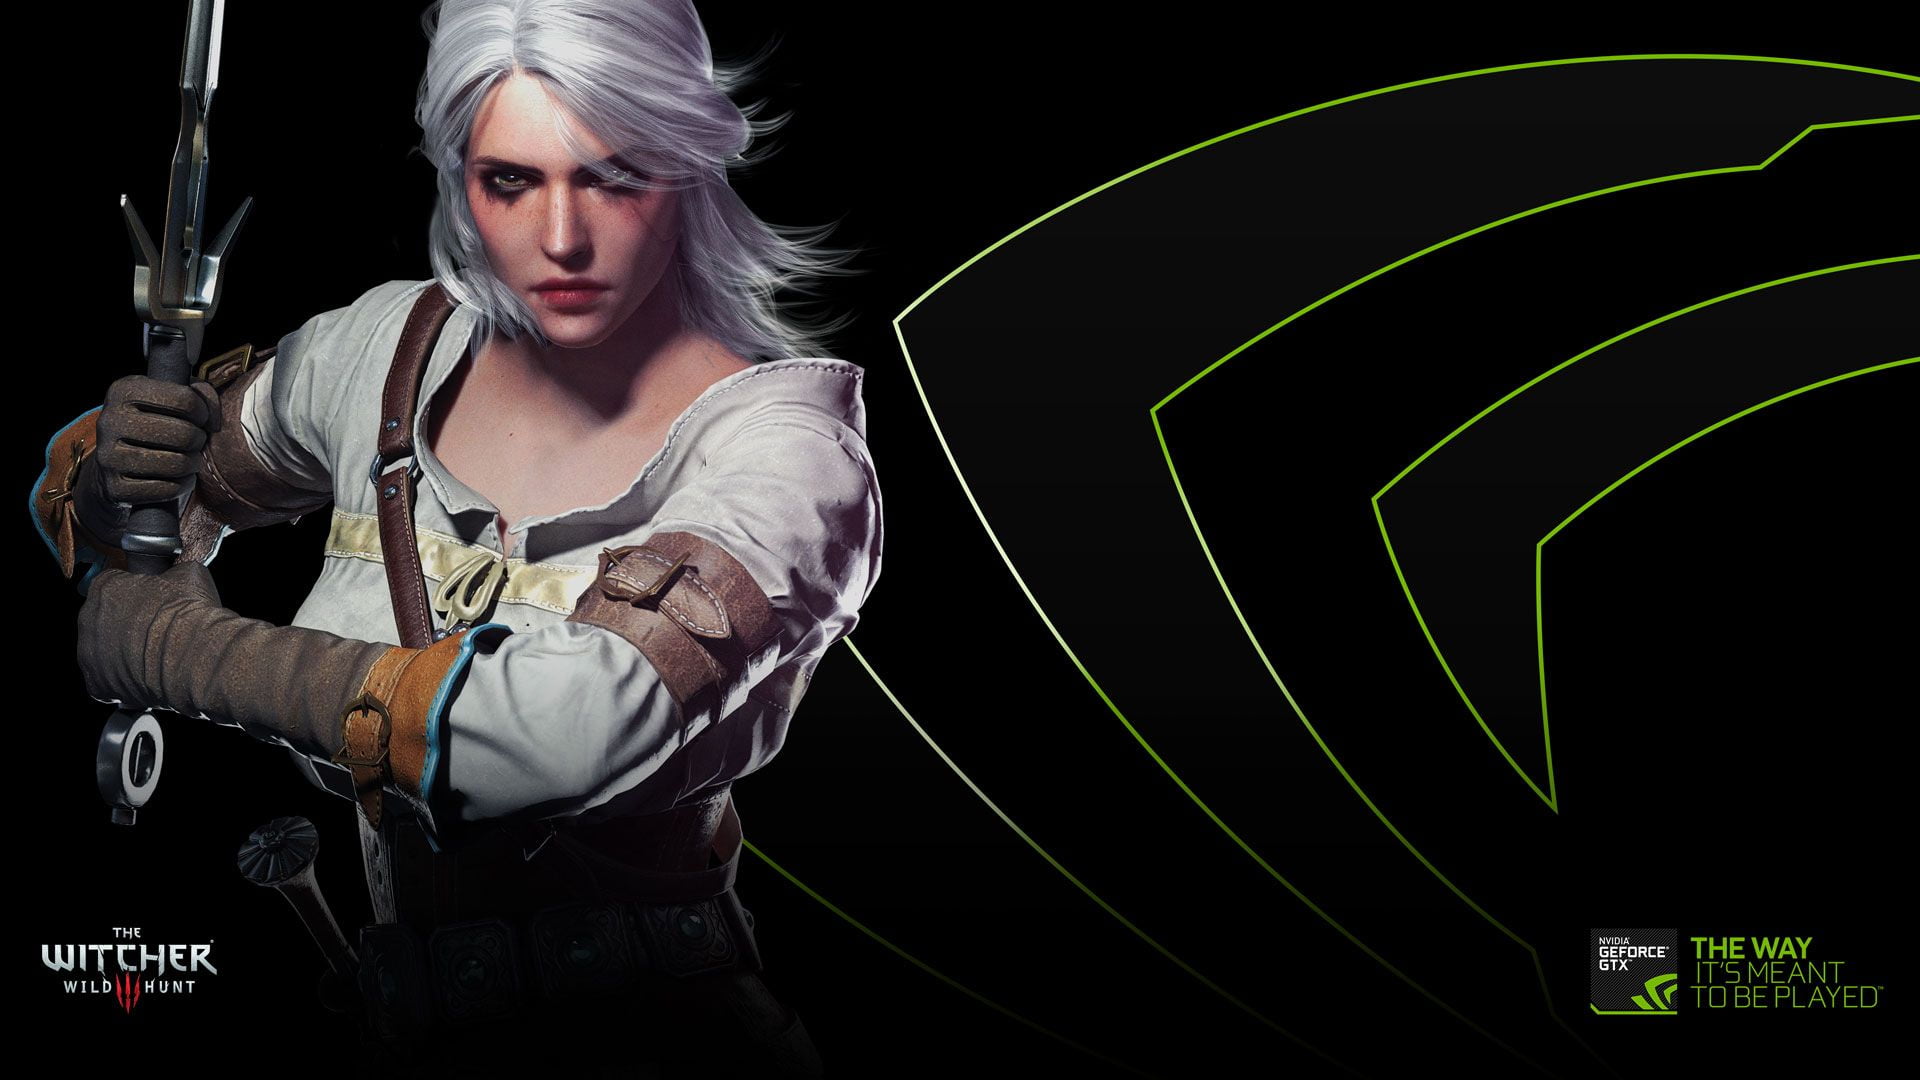 The Witcher, Wallpaper Theme